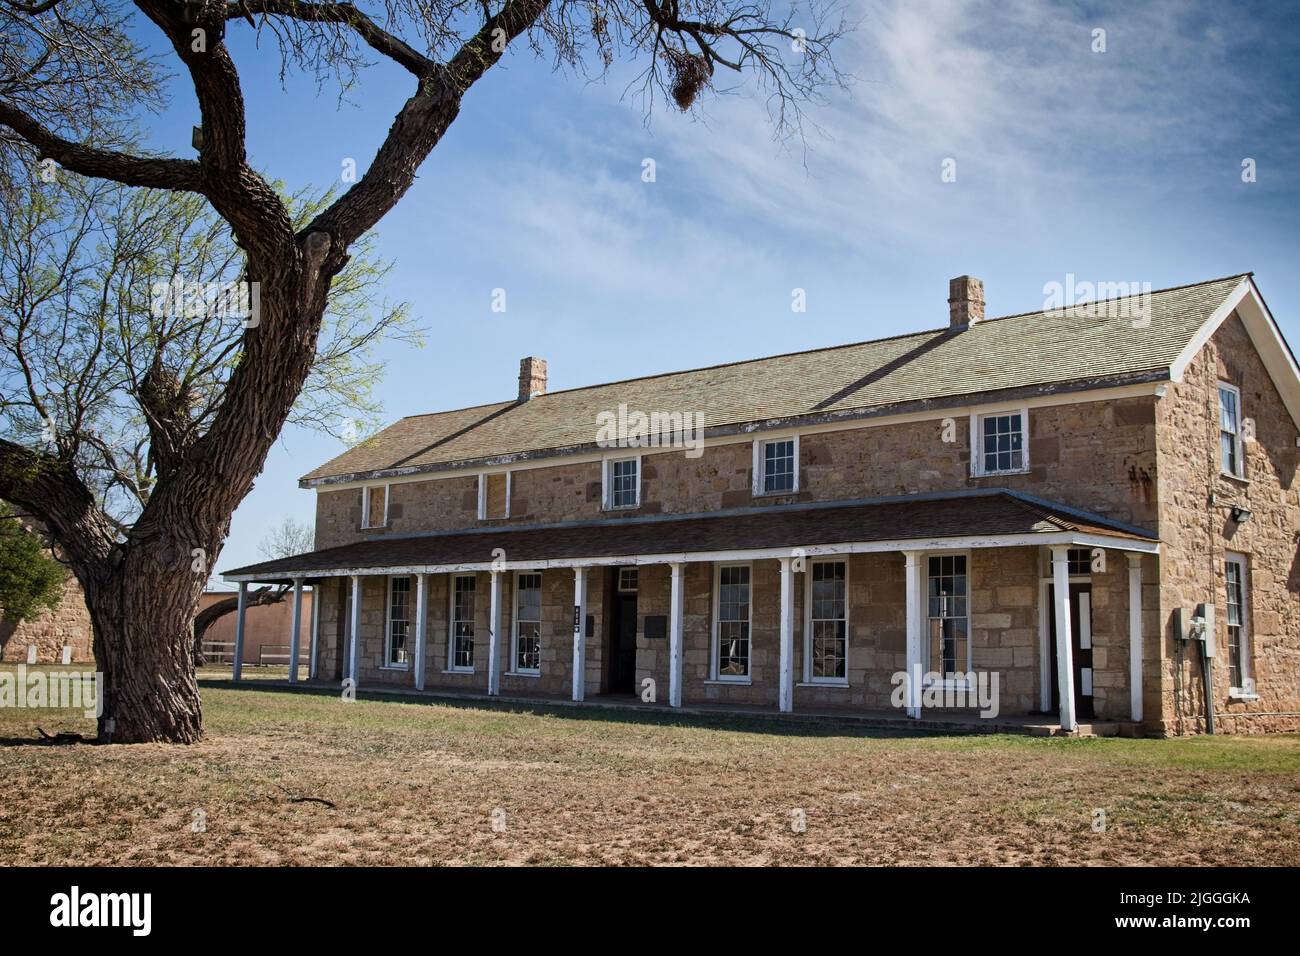 Headquarters at Fort Concho: The photograph includes a prominent tree in front of the Headquarters building at old Fort Concho, in San Angelo, Texas.. Stock Photo